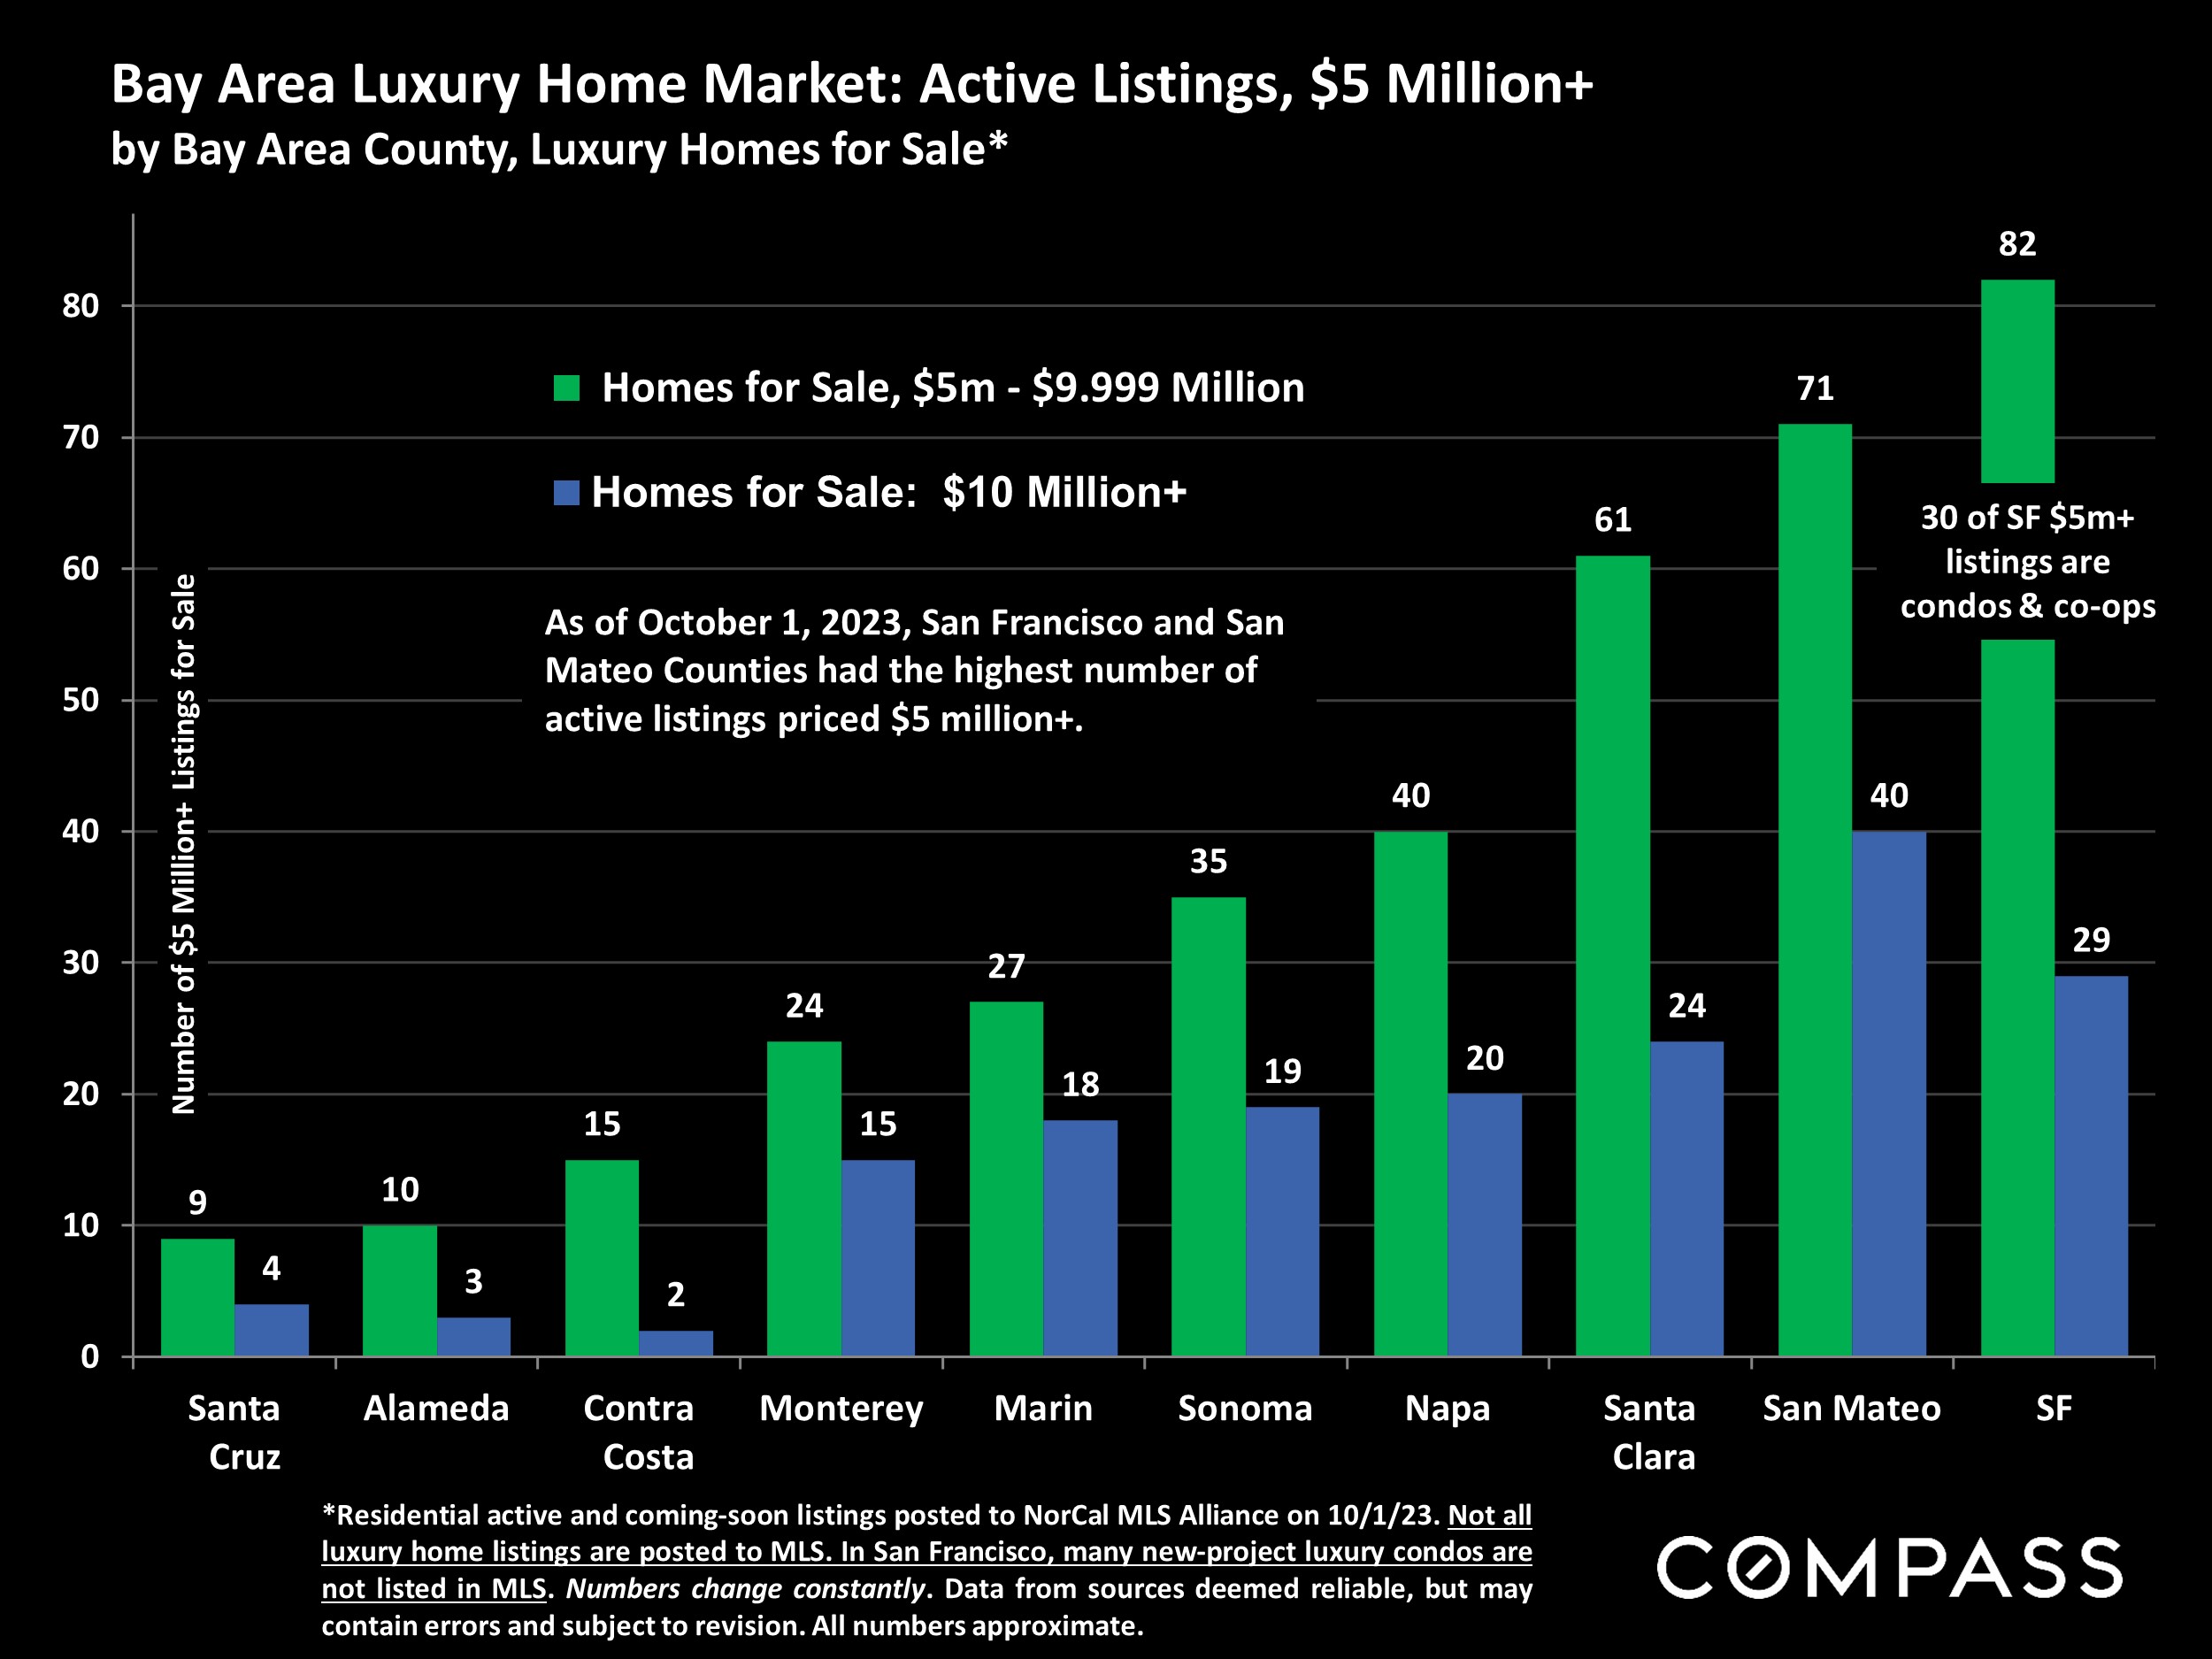 Bay Area Luxury Home Market: Active Listings, $5 Million+ by Bay Area County, Luxury Homes for Sale*